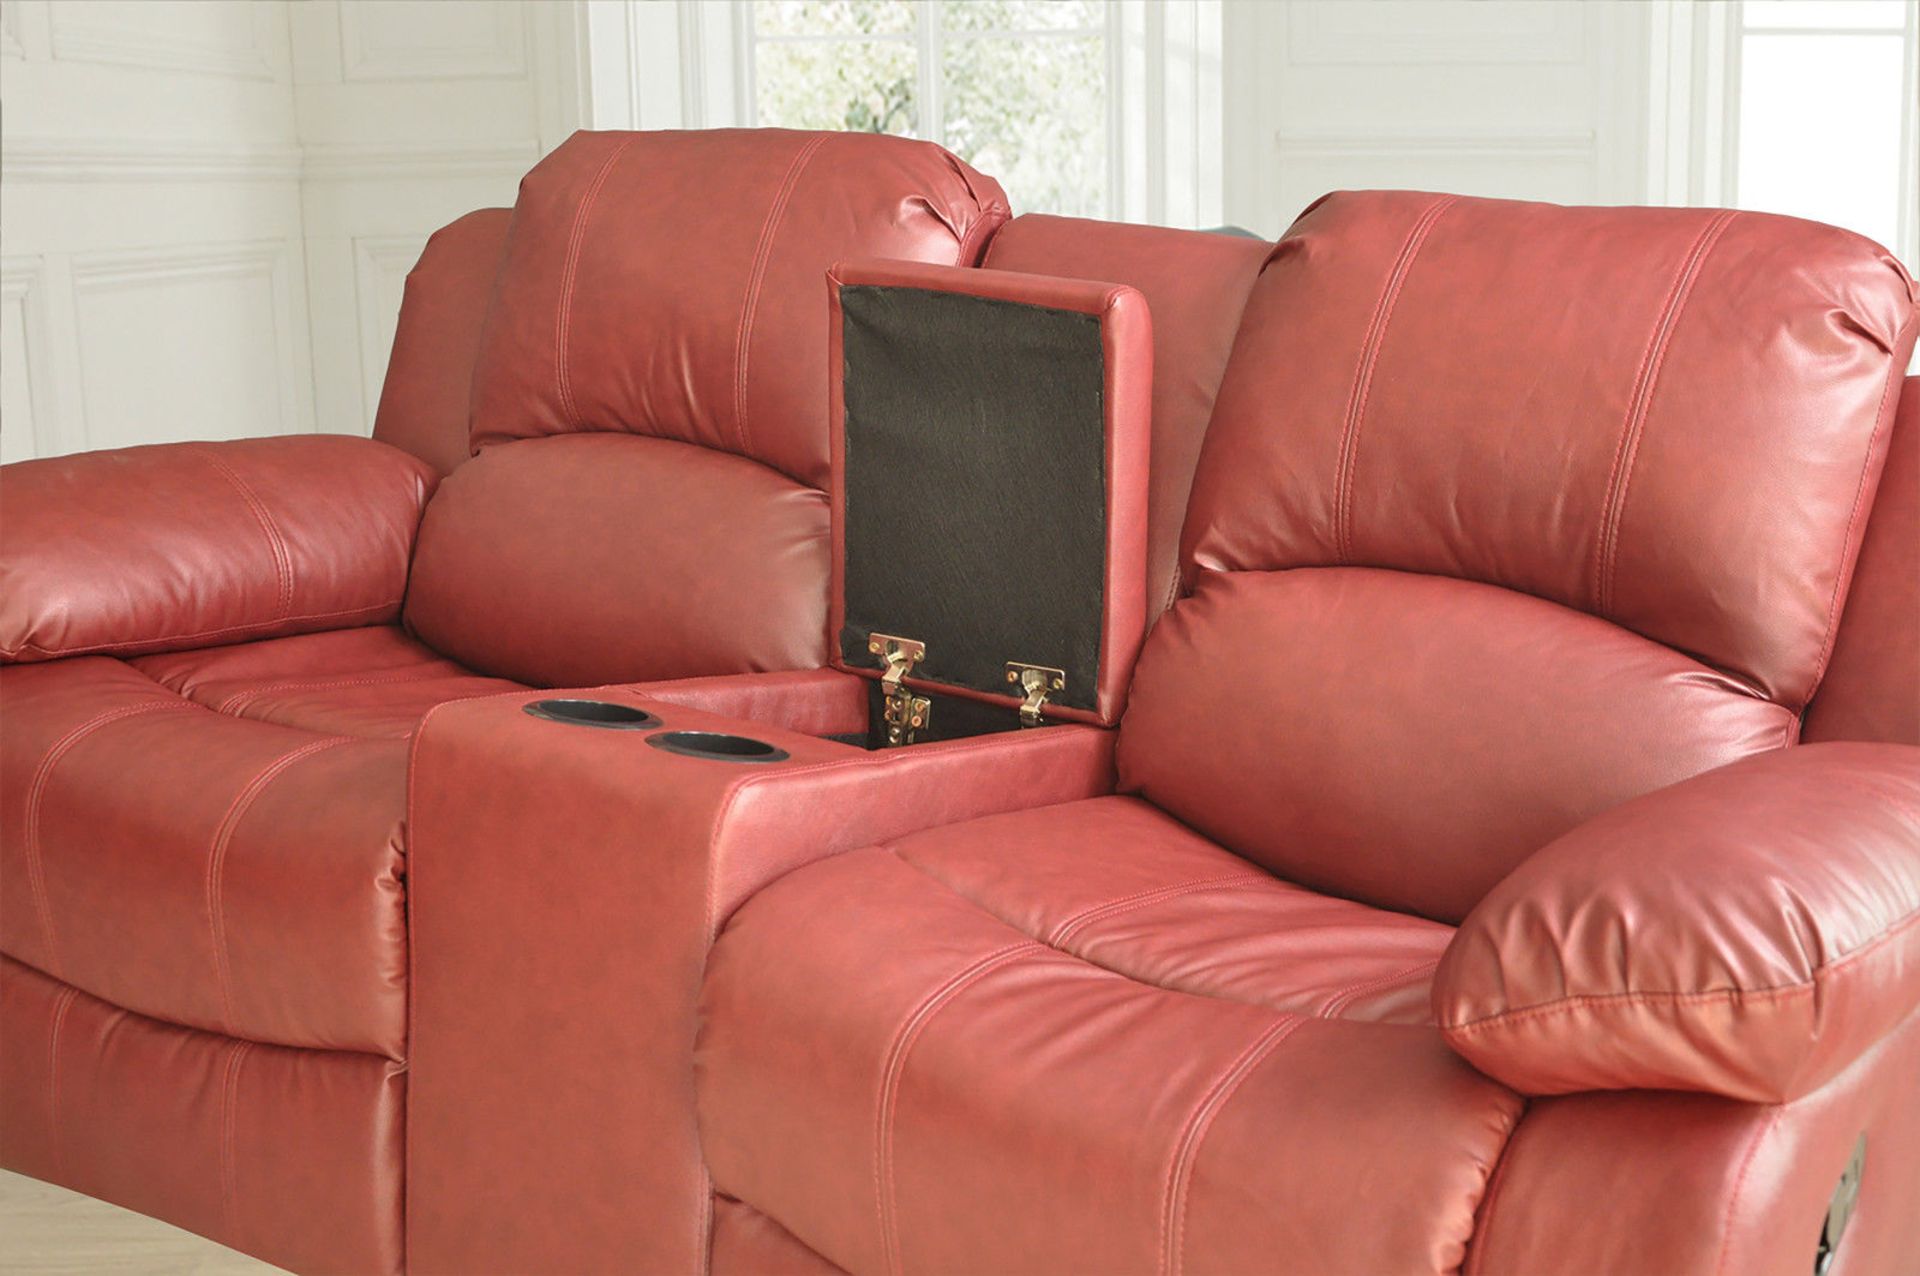 Supreme Valance burgandy leather 3 seater reclining sofa with console - Image 2 of 3